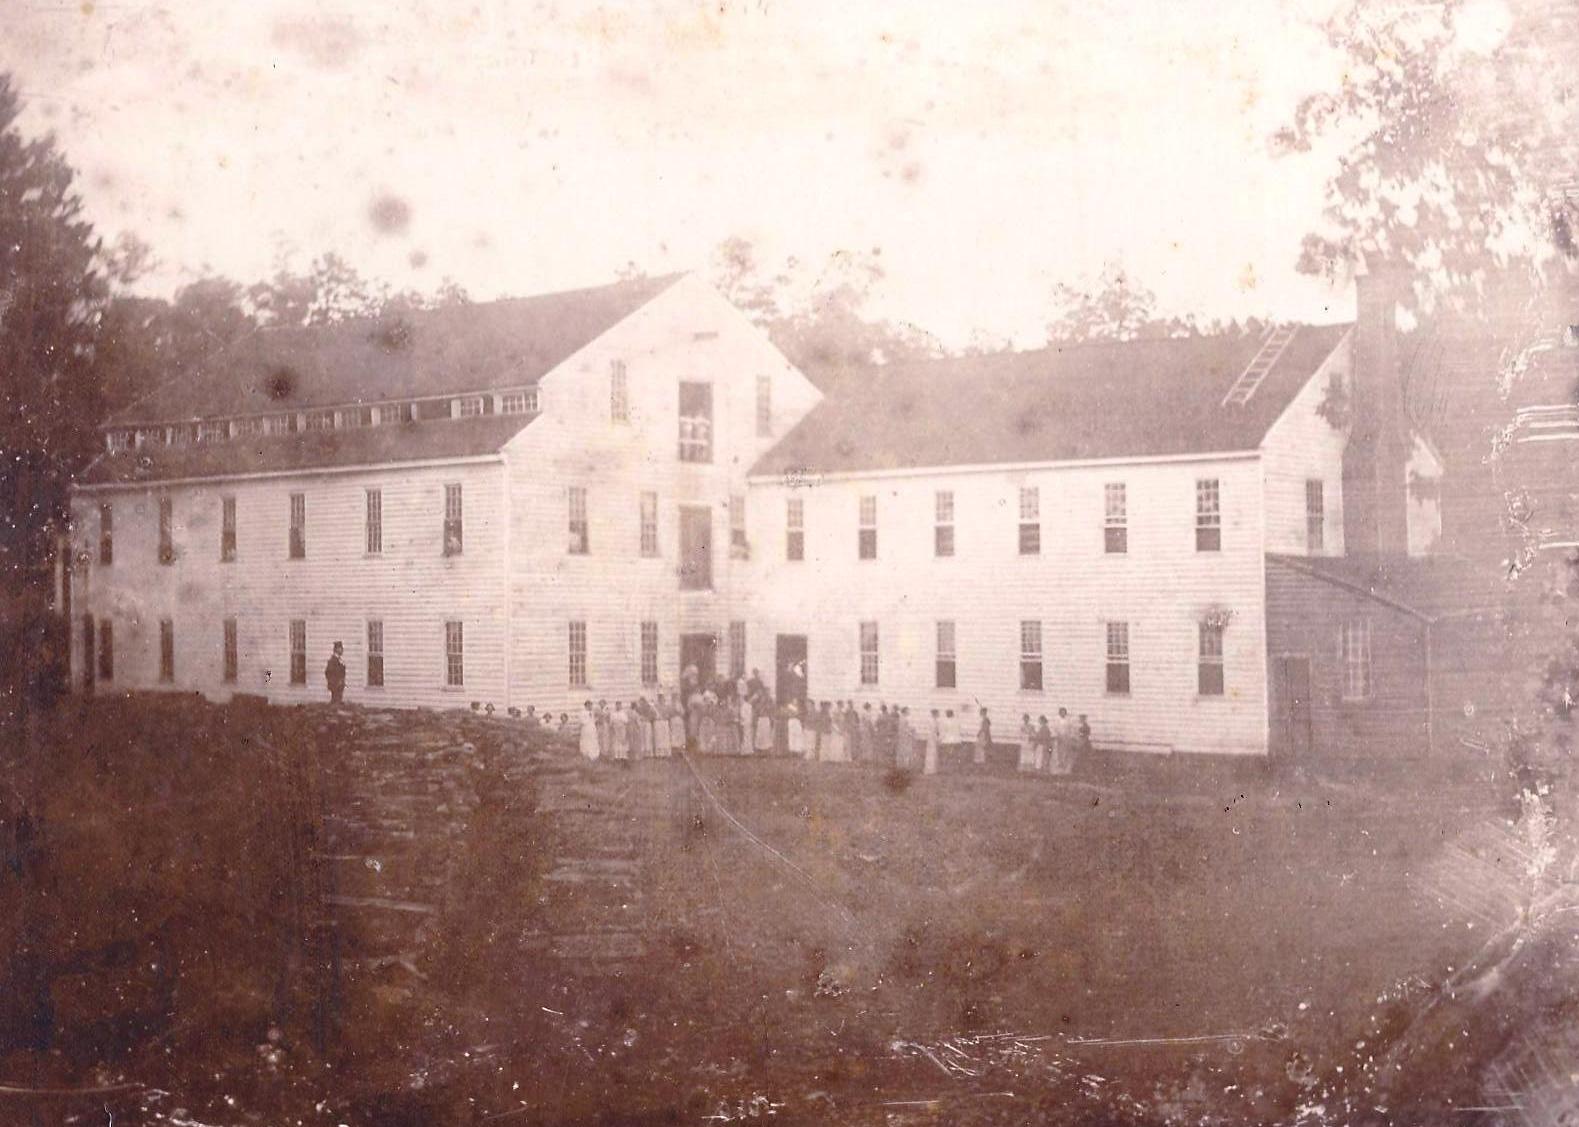 Photograph of Alamance Cotton Mill, as it appeared in 1837 shortly after construction.